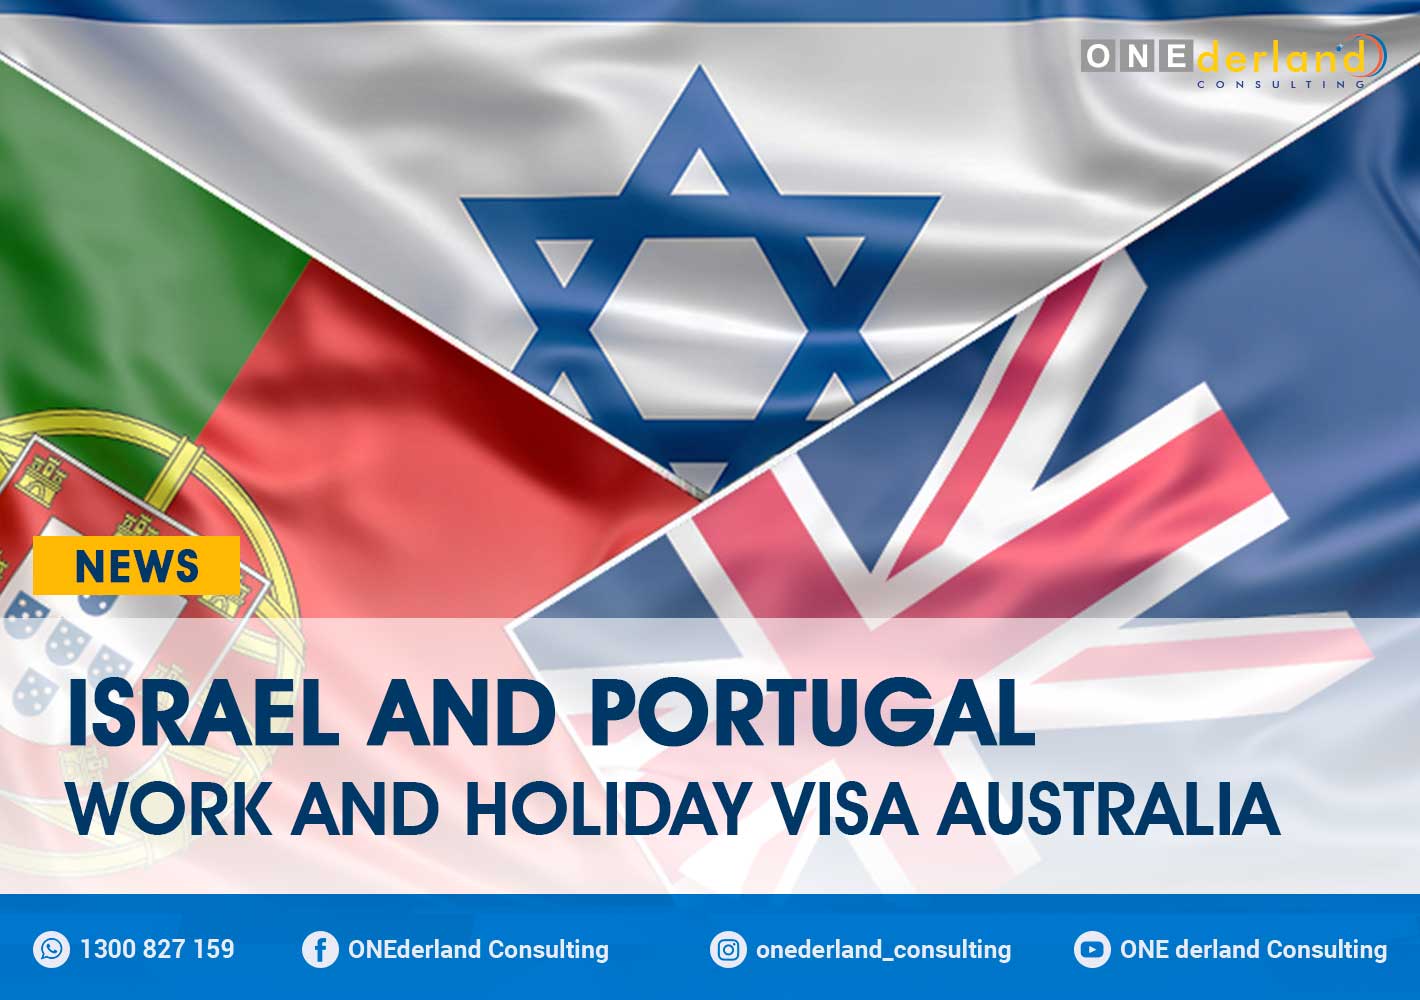 Work Holiday Visa Australia for Israel and Portugal National